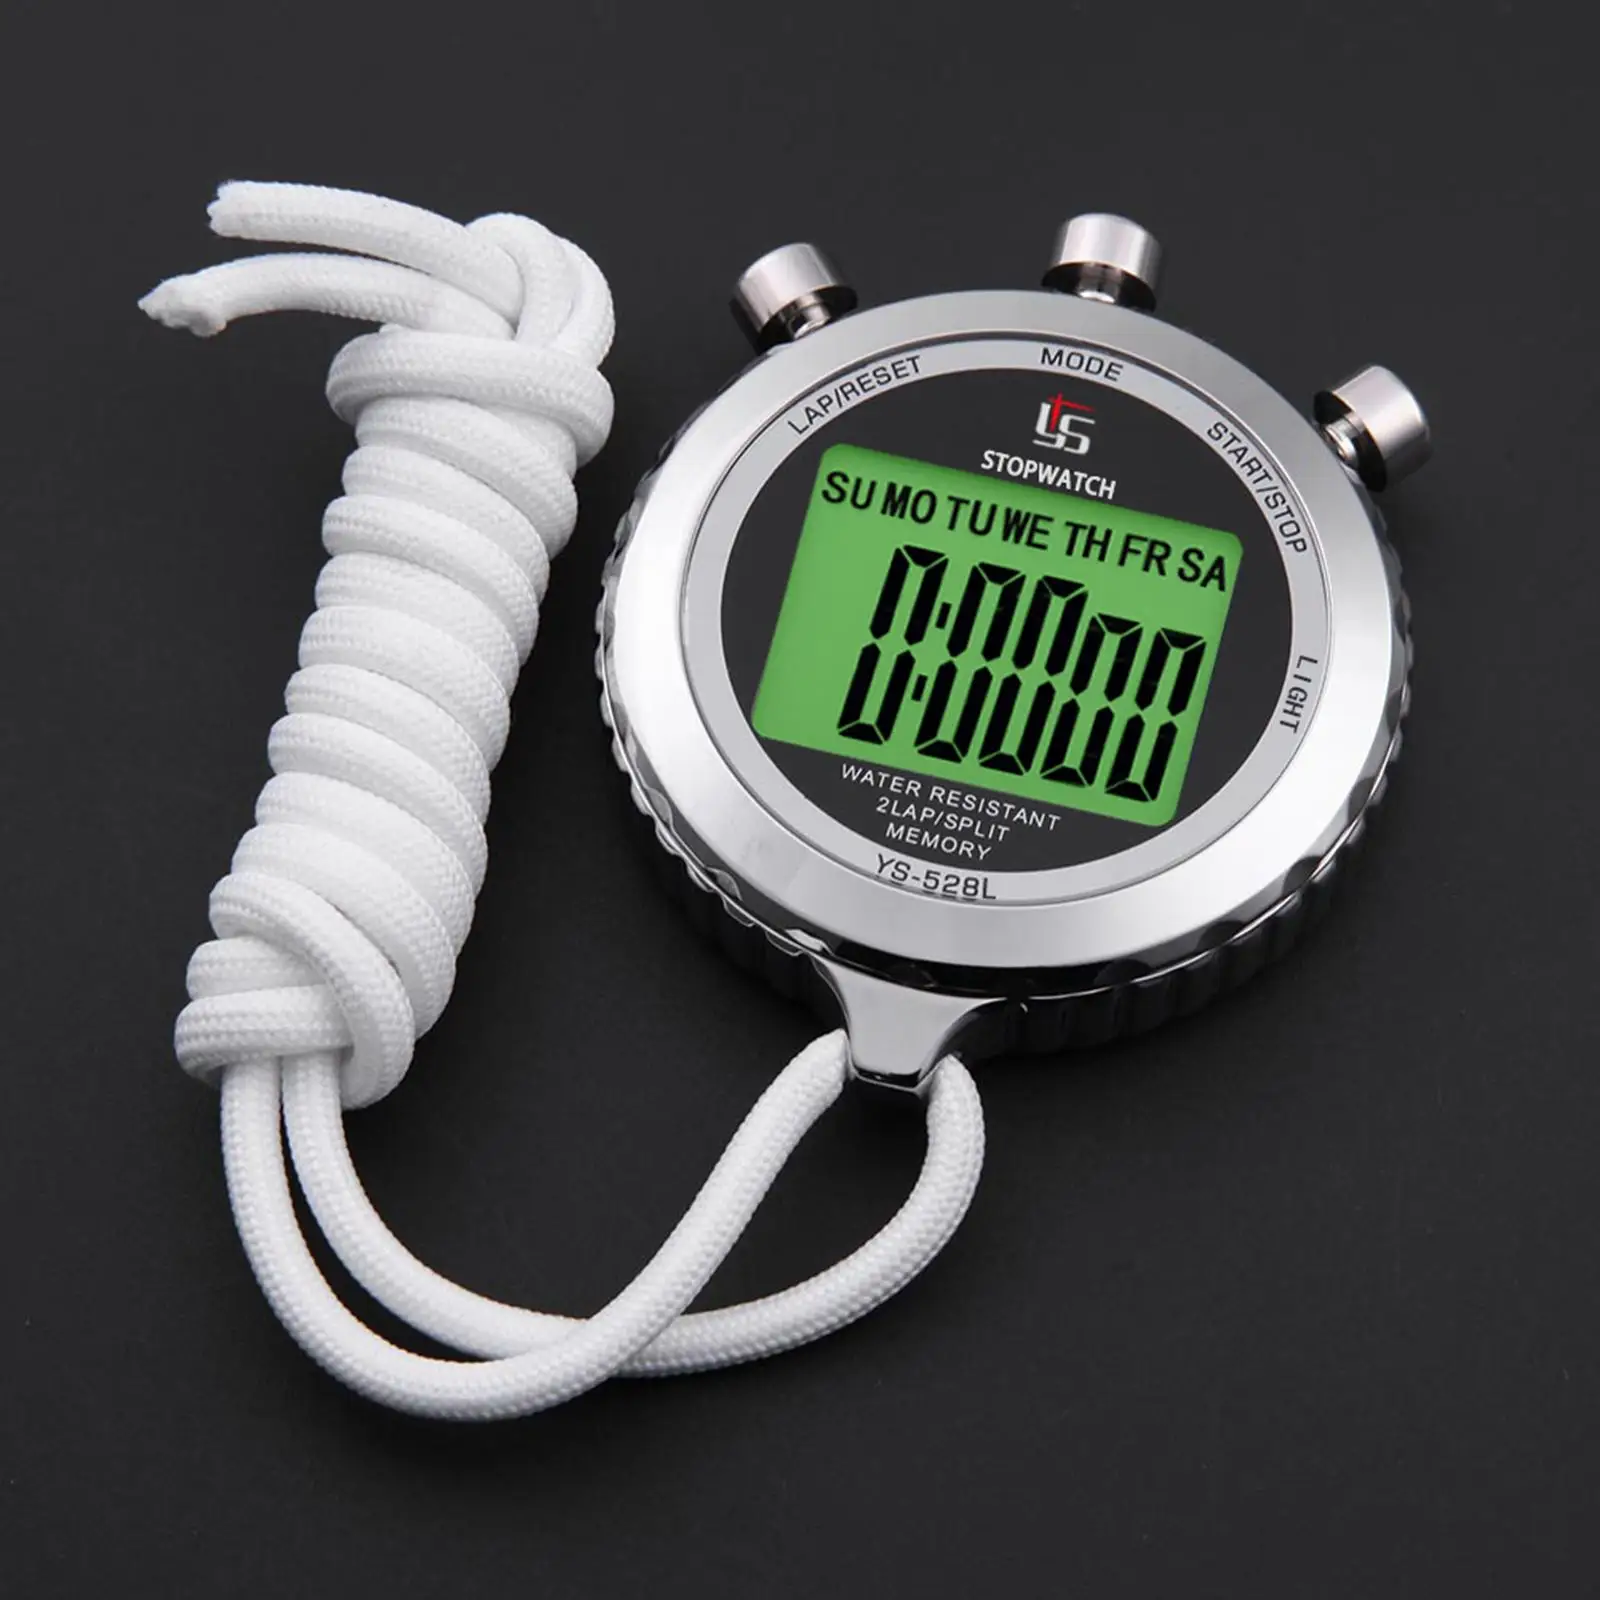 Stopwatch 0.01 Seconds Memory Stop Watch Large Display Timer Sports Counter Sports for Running Outdoor Coaches Referee Baseball